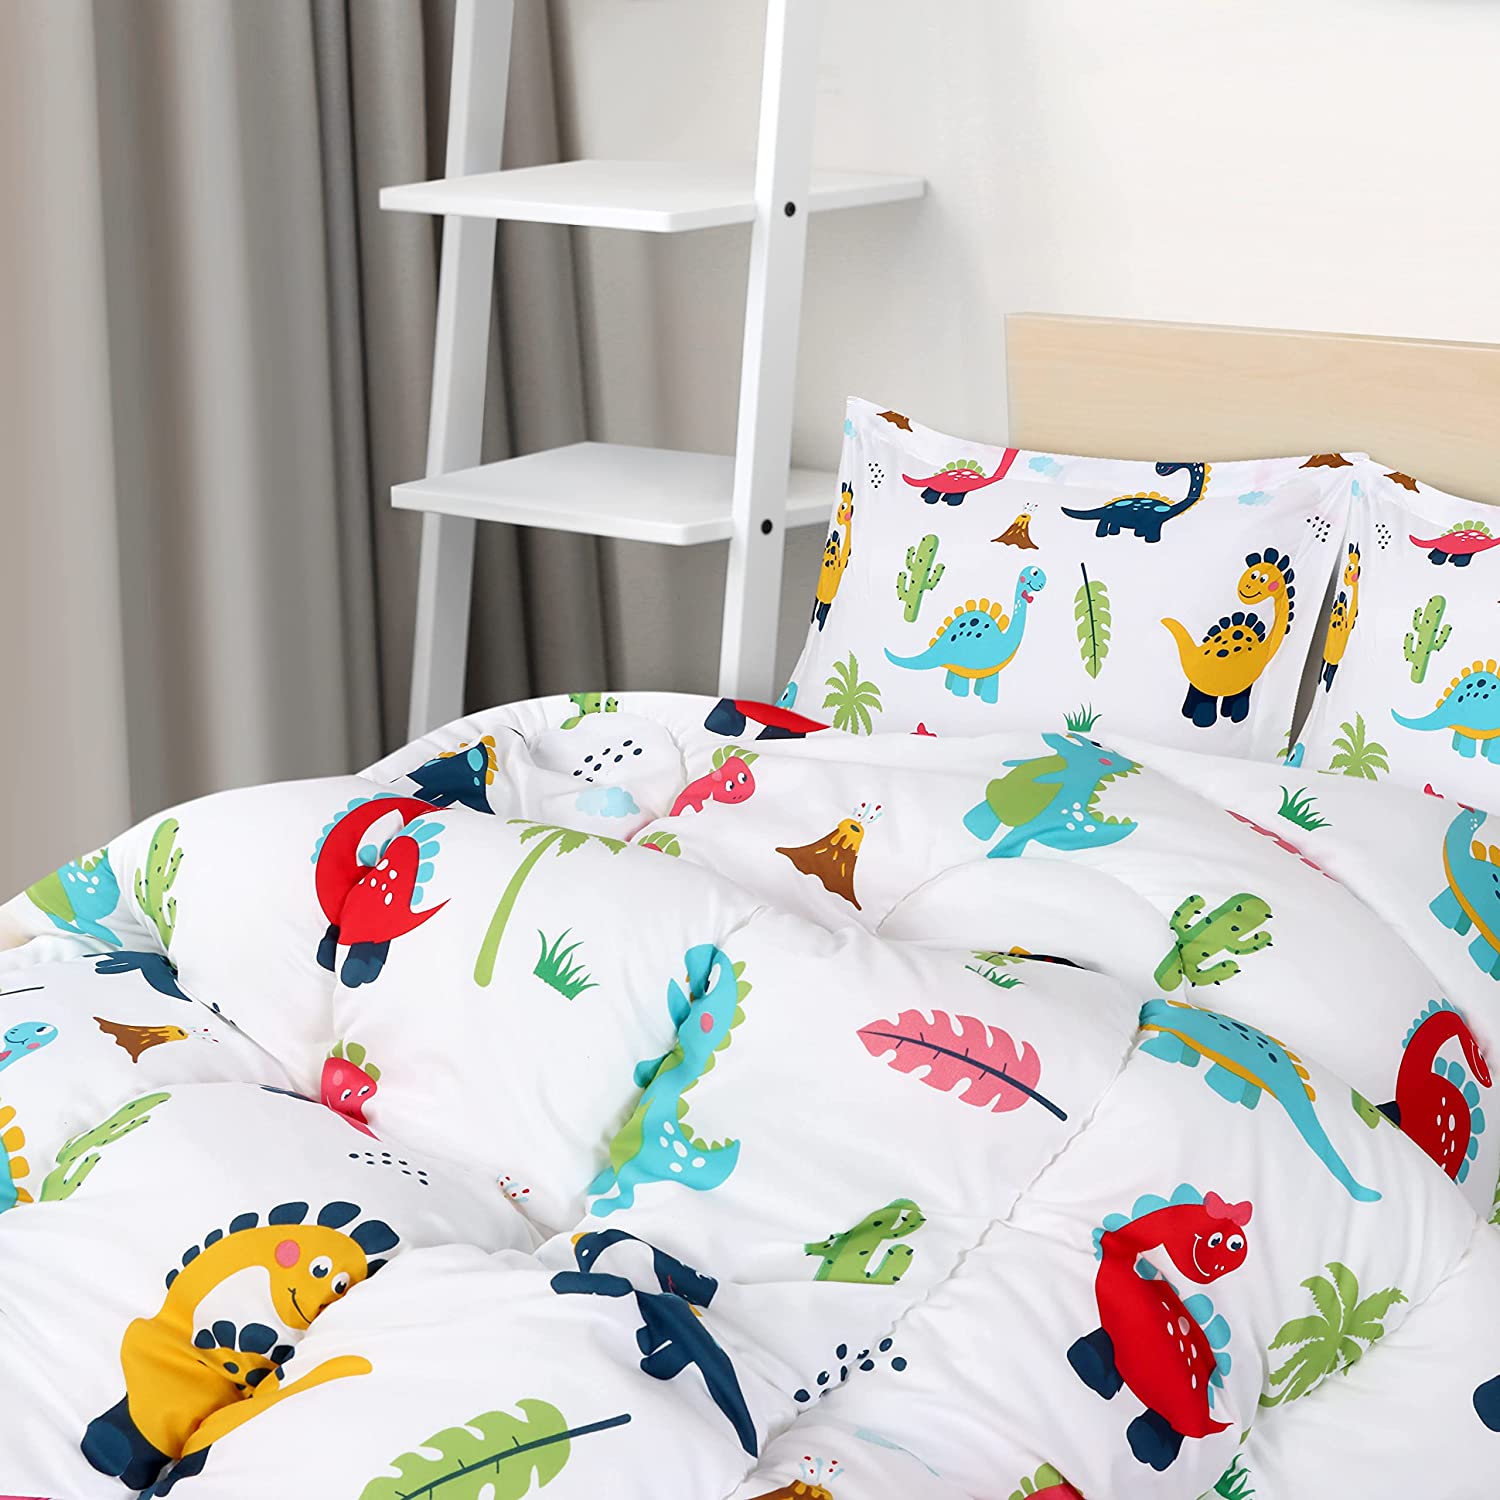 The Utopia Bedding Sheet Set Is on Sale at